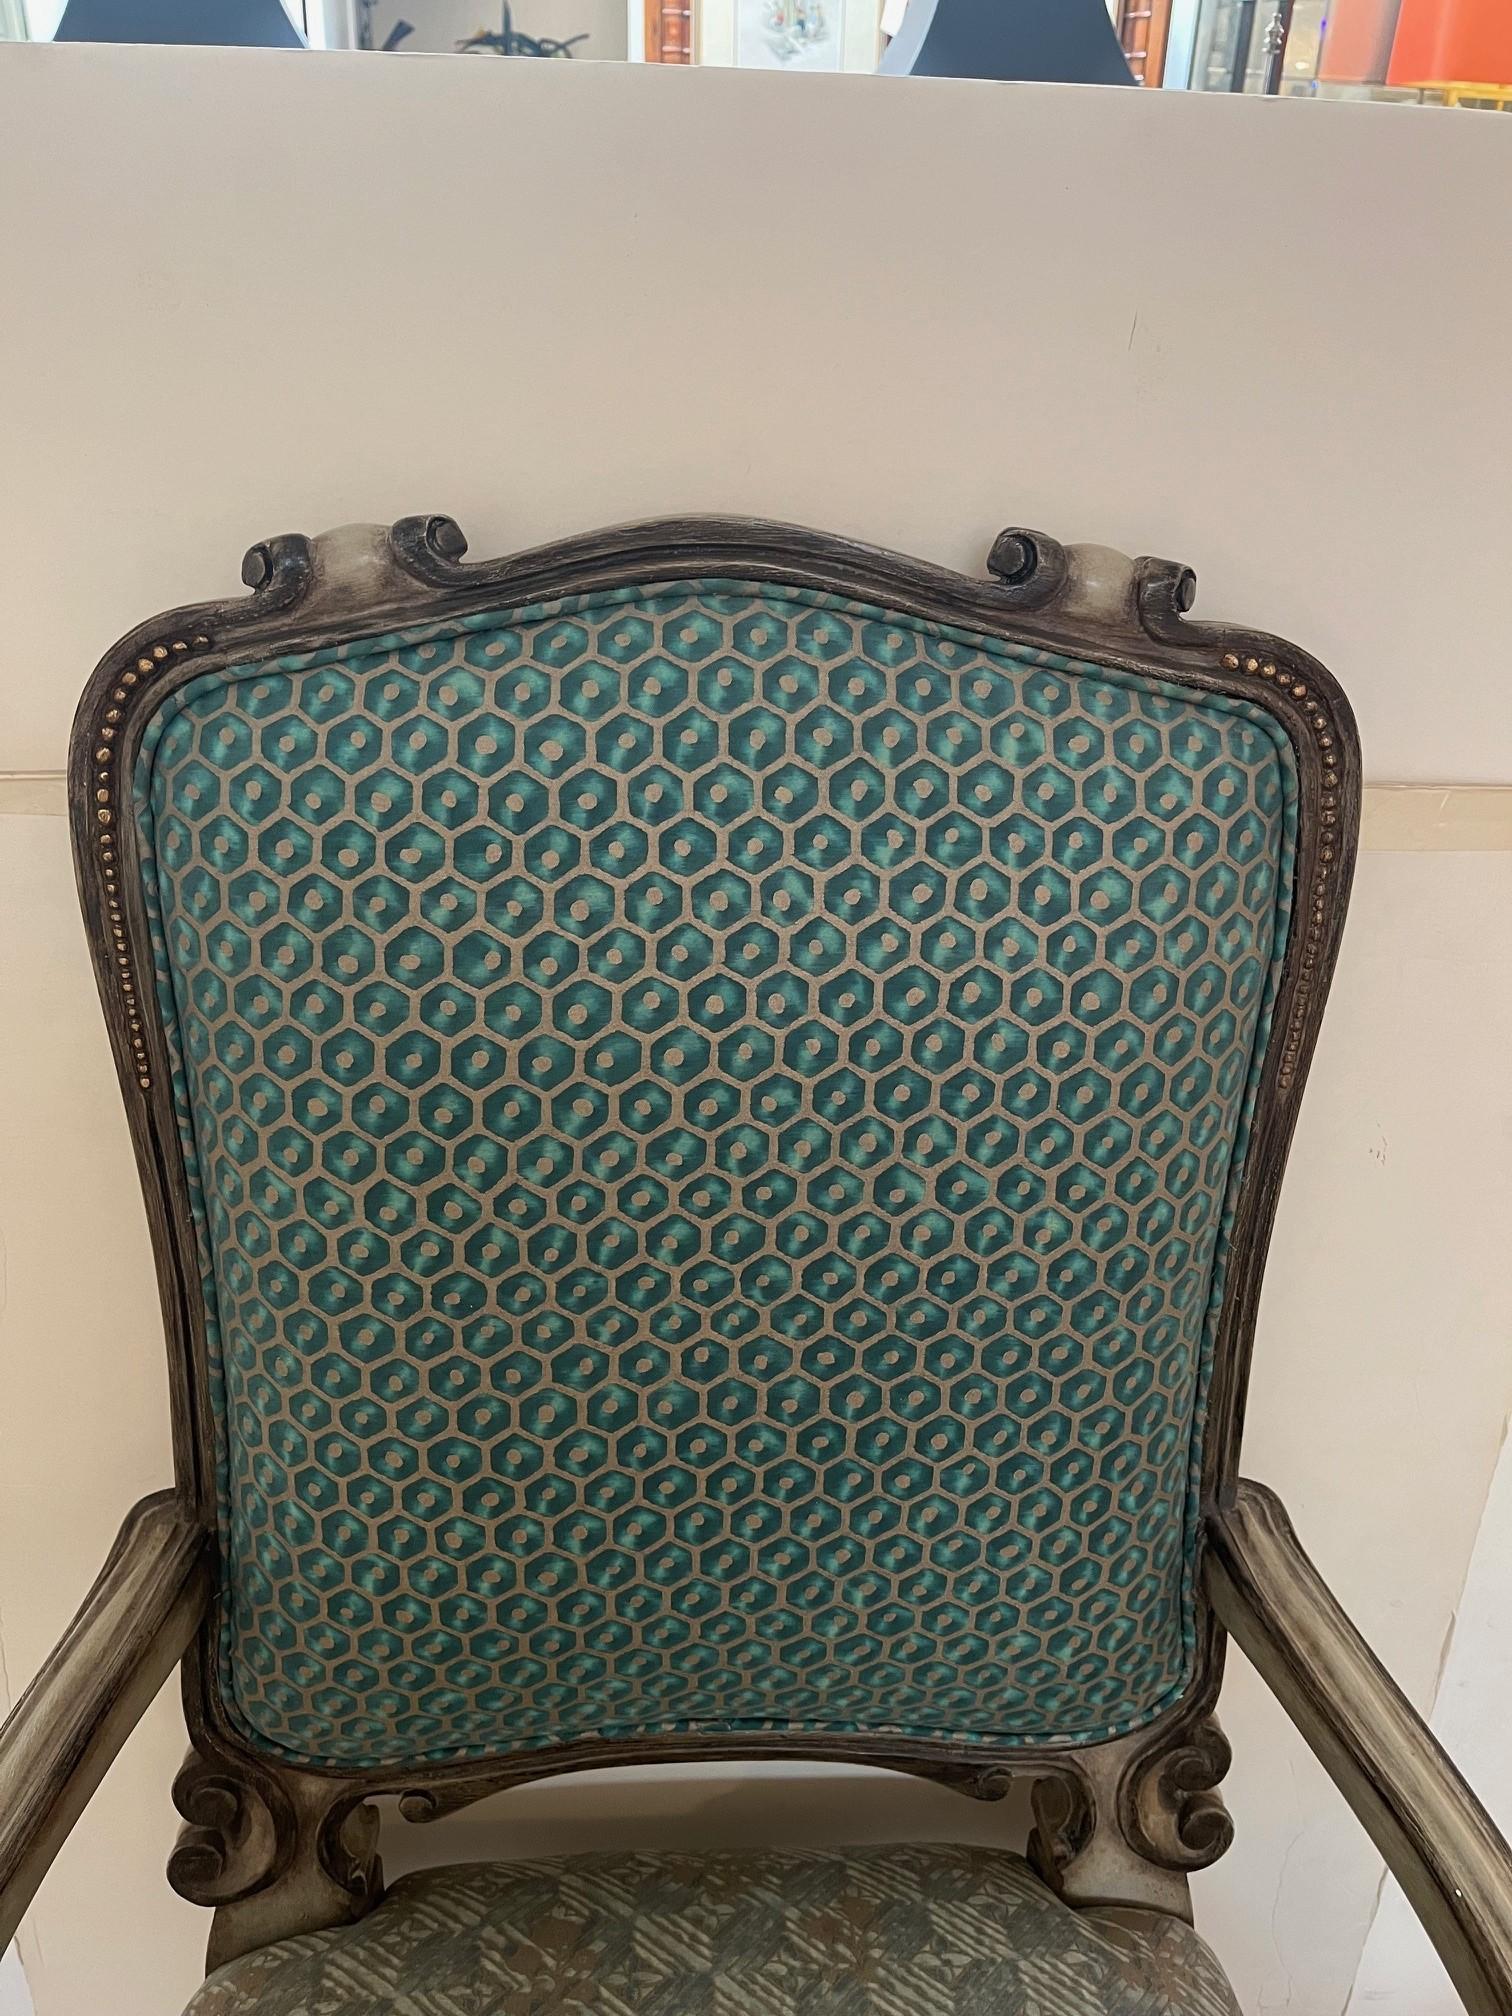 Made to Order Hand Carved Hand Painted Fontain Dining Armchair Finish with Antique Painted Finish with Gilded Detail, upholstered in Fortuny Fabric, this is a Showroom Model
upholstery: Customer Own Material